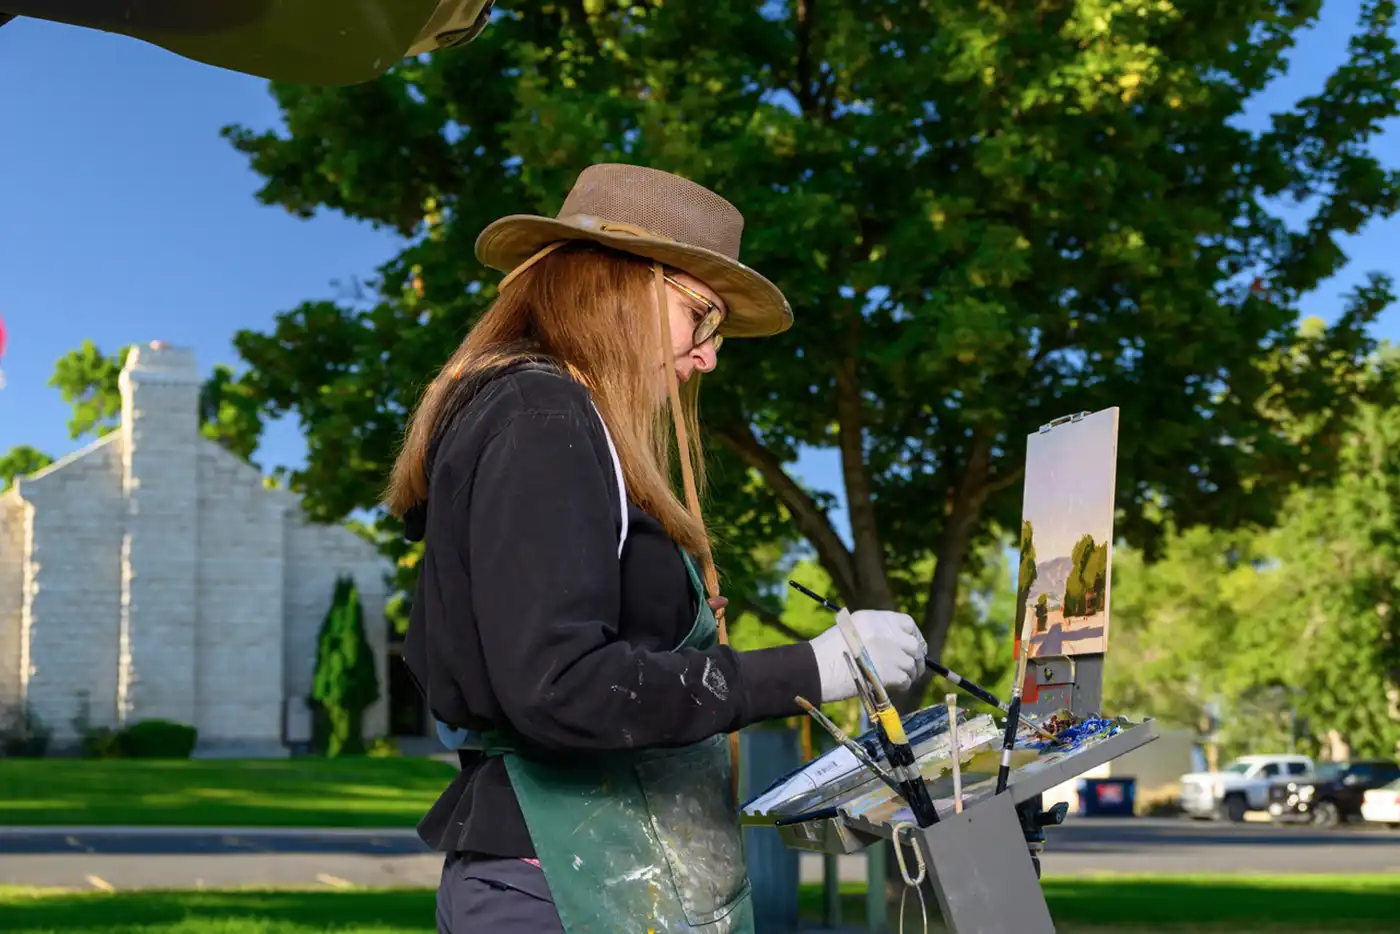 Jane Anne Woodhead works on her painting Sanpete Sky, capturing life “out of doors” in the Spring City Plein Air Painting Competition.